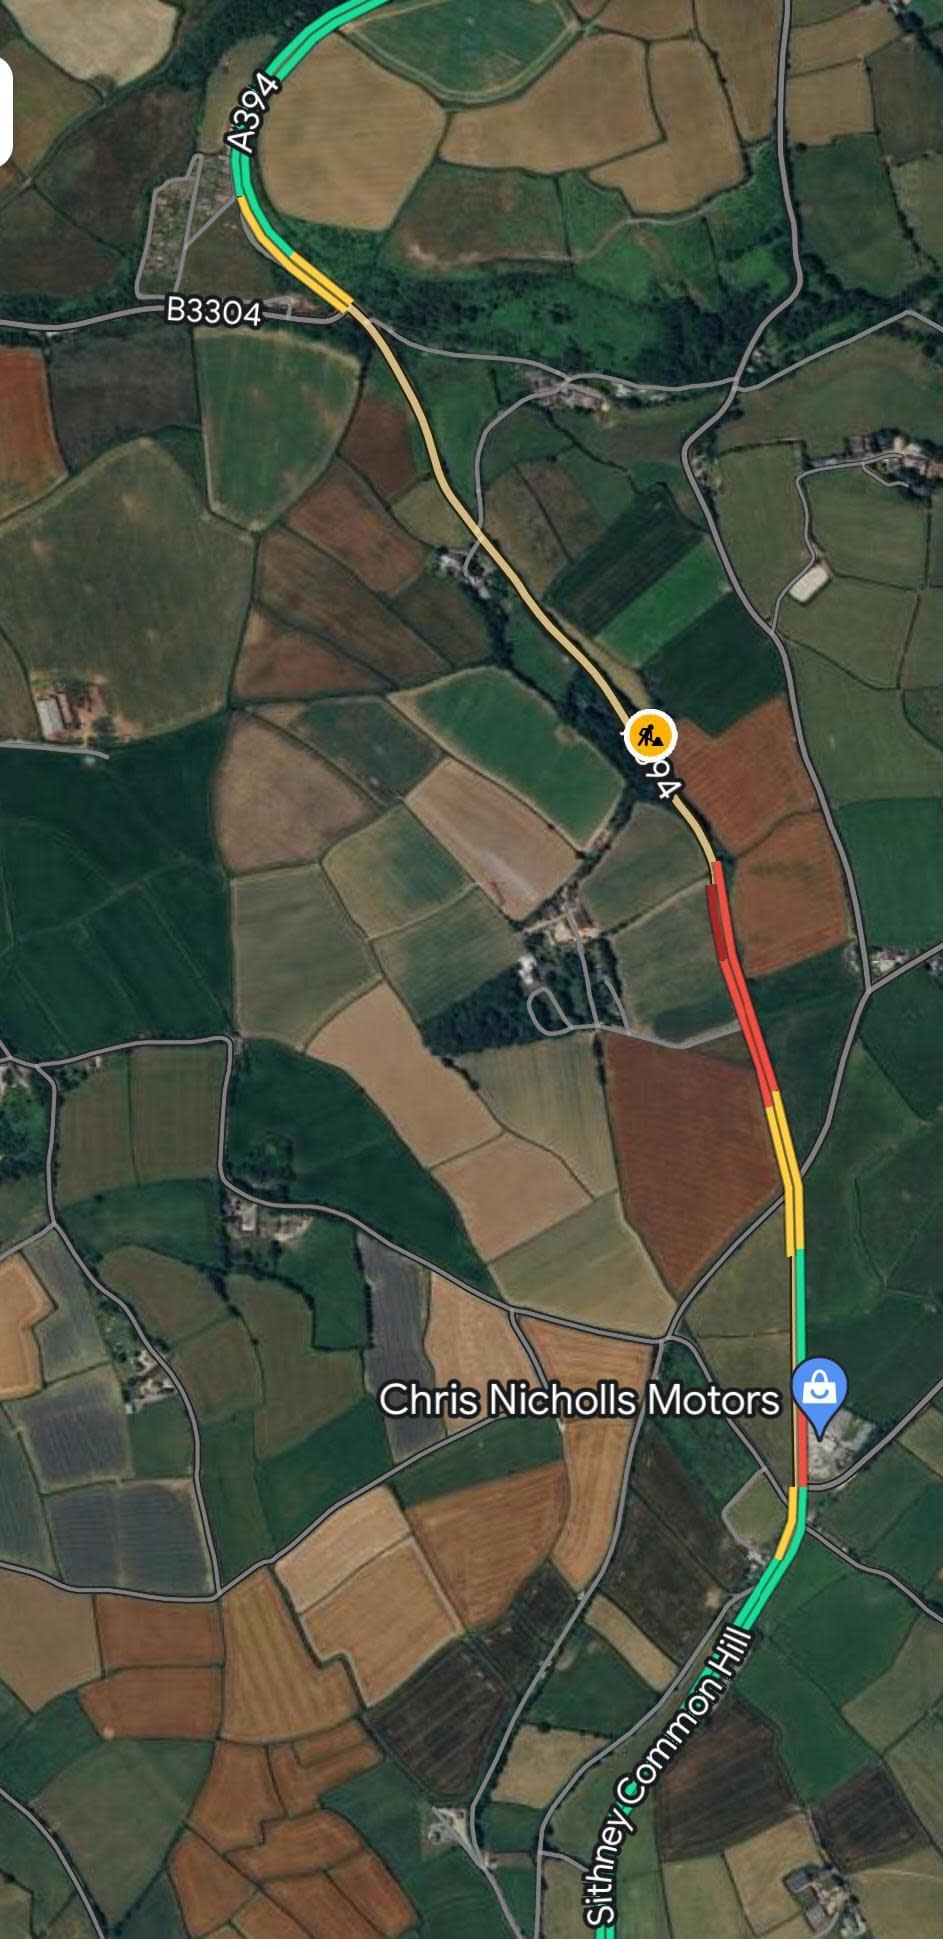 Falmouth Packet: Google Maps showed slow moving traffic just past Chris Nicholls on the A394 this morning 